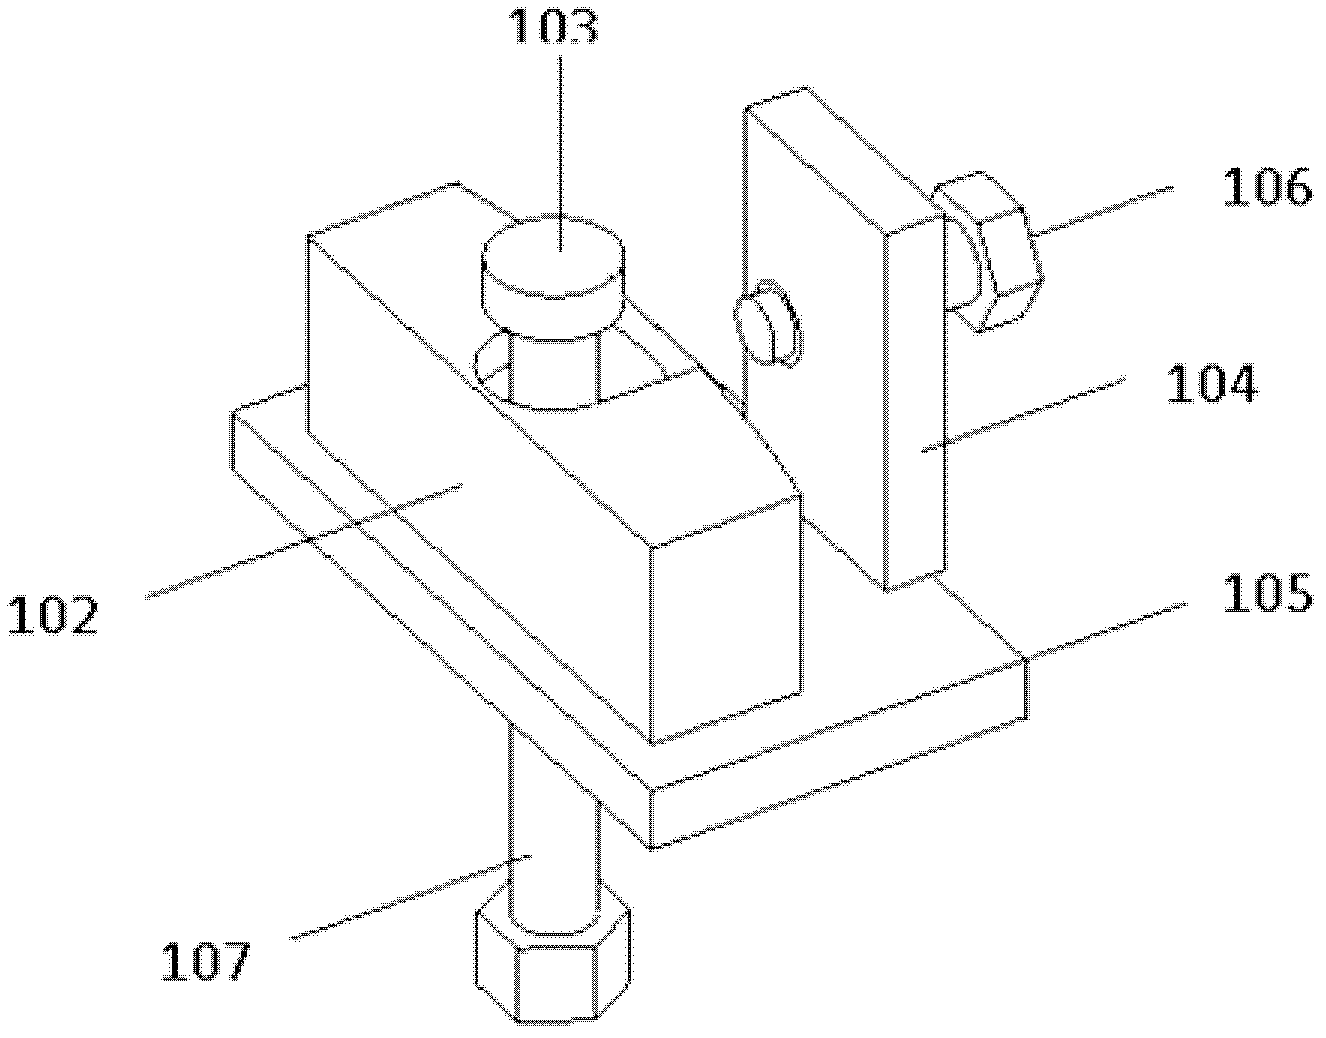 Tool and method for replacing large-end bearing shell of connecting rod in diesel engine of mega-kilowatt nuclear power plant